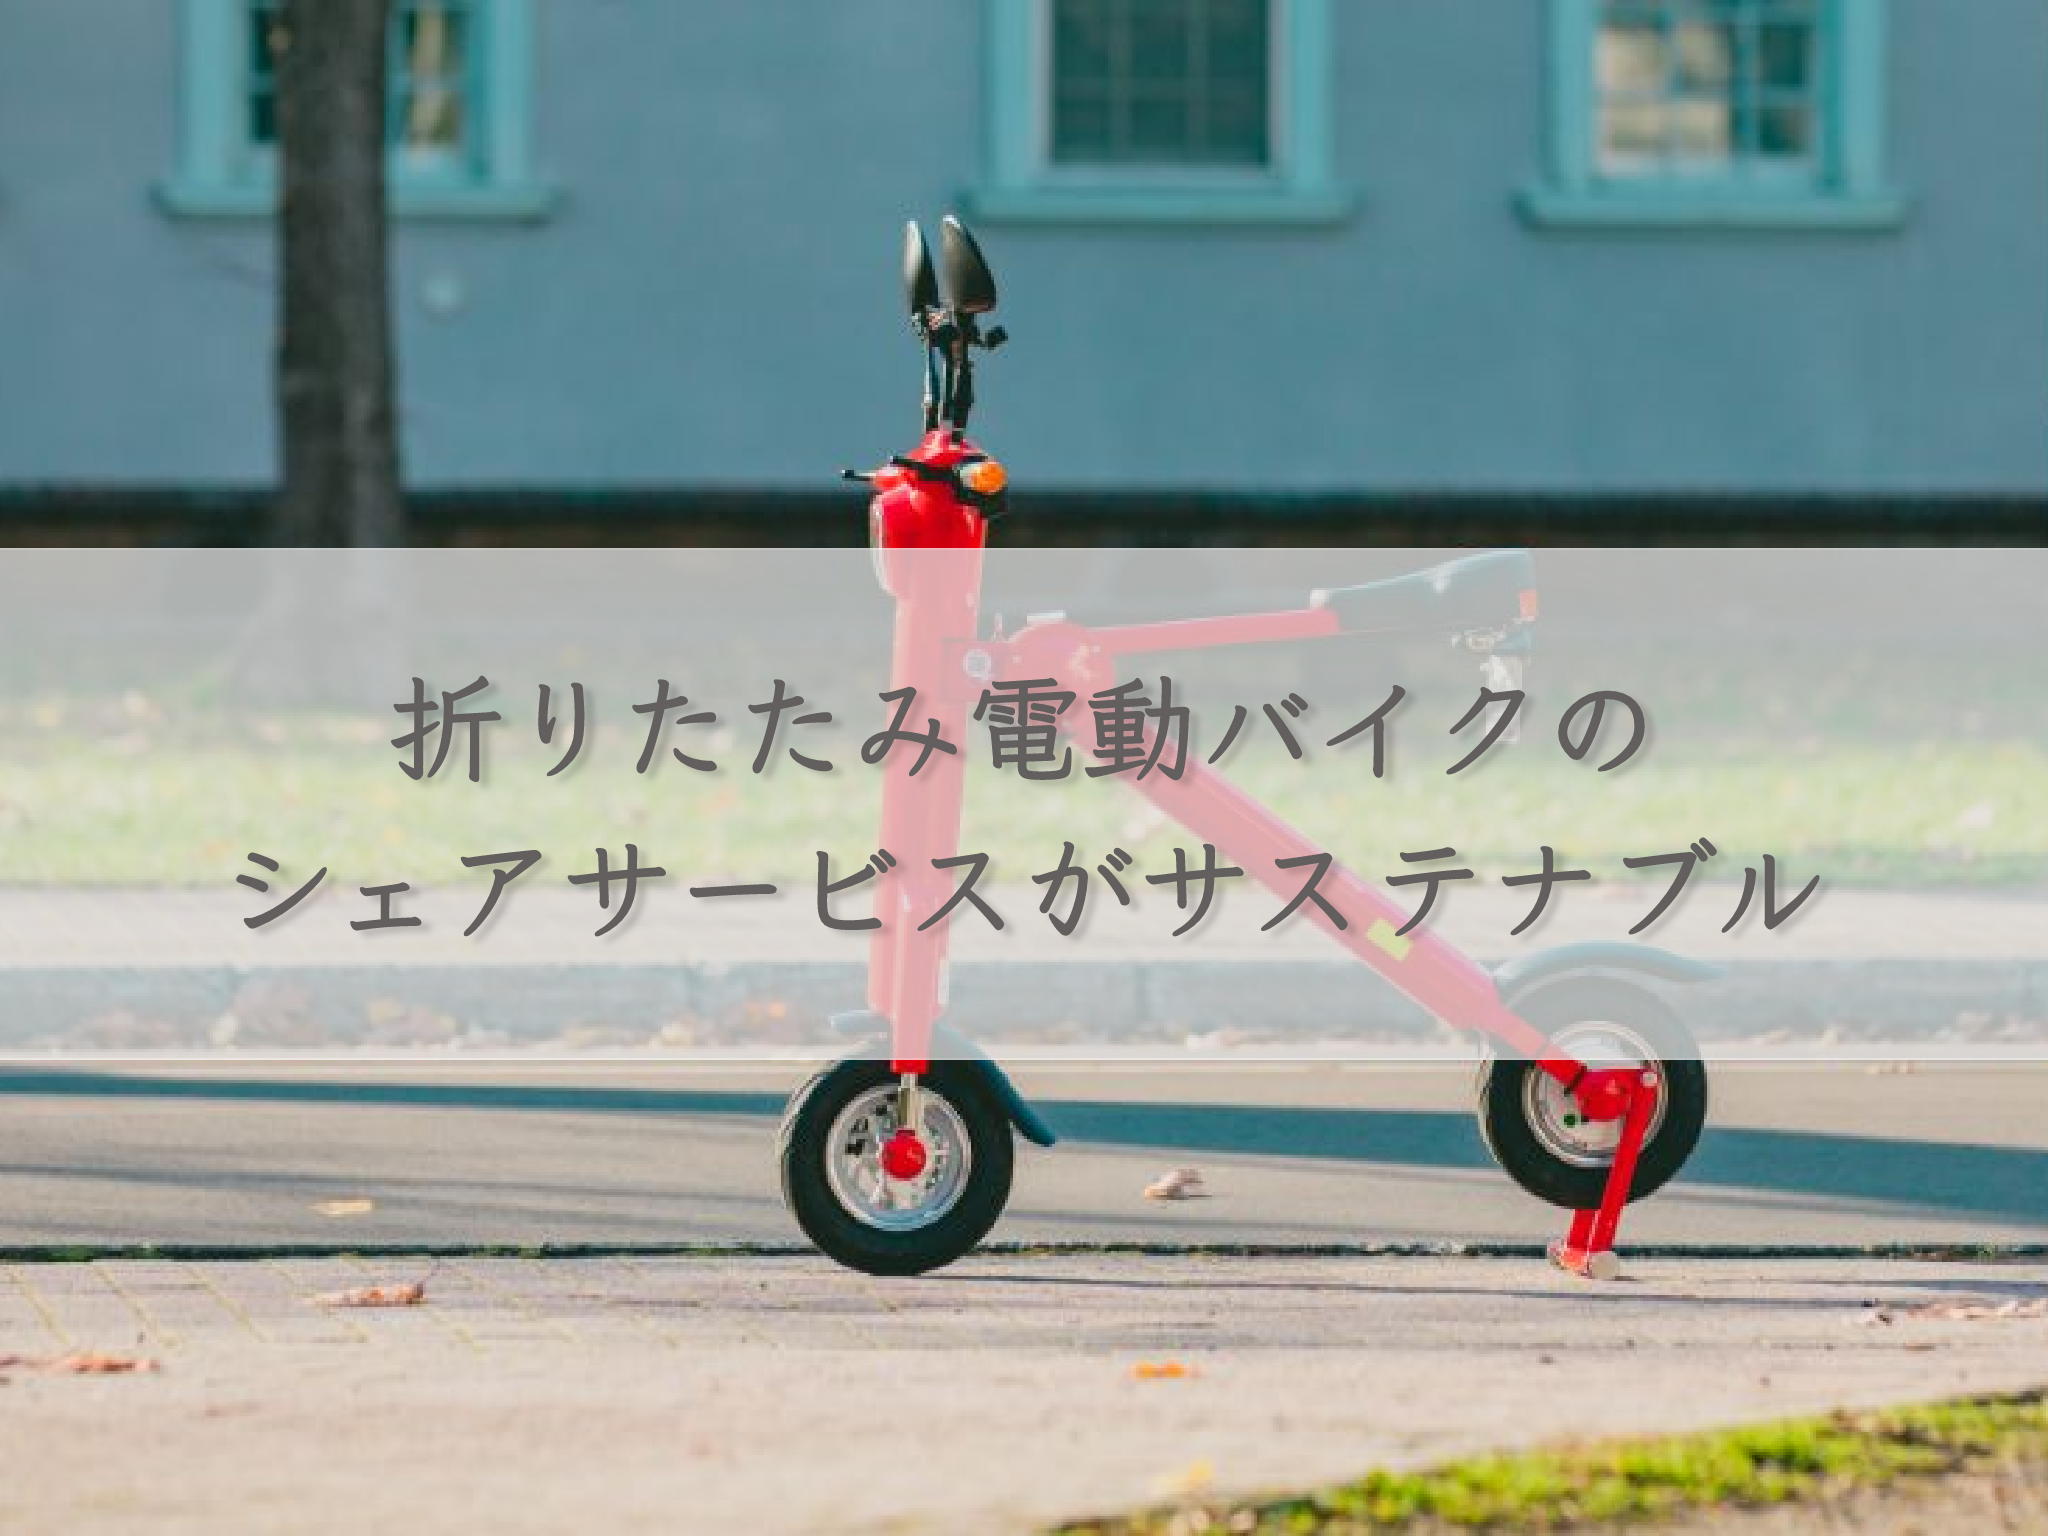 folding-electric-bike-sharing-service-is-sustainable